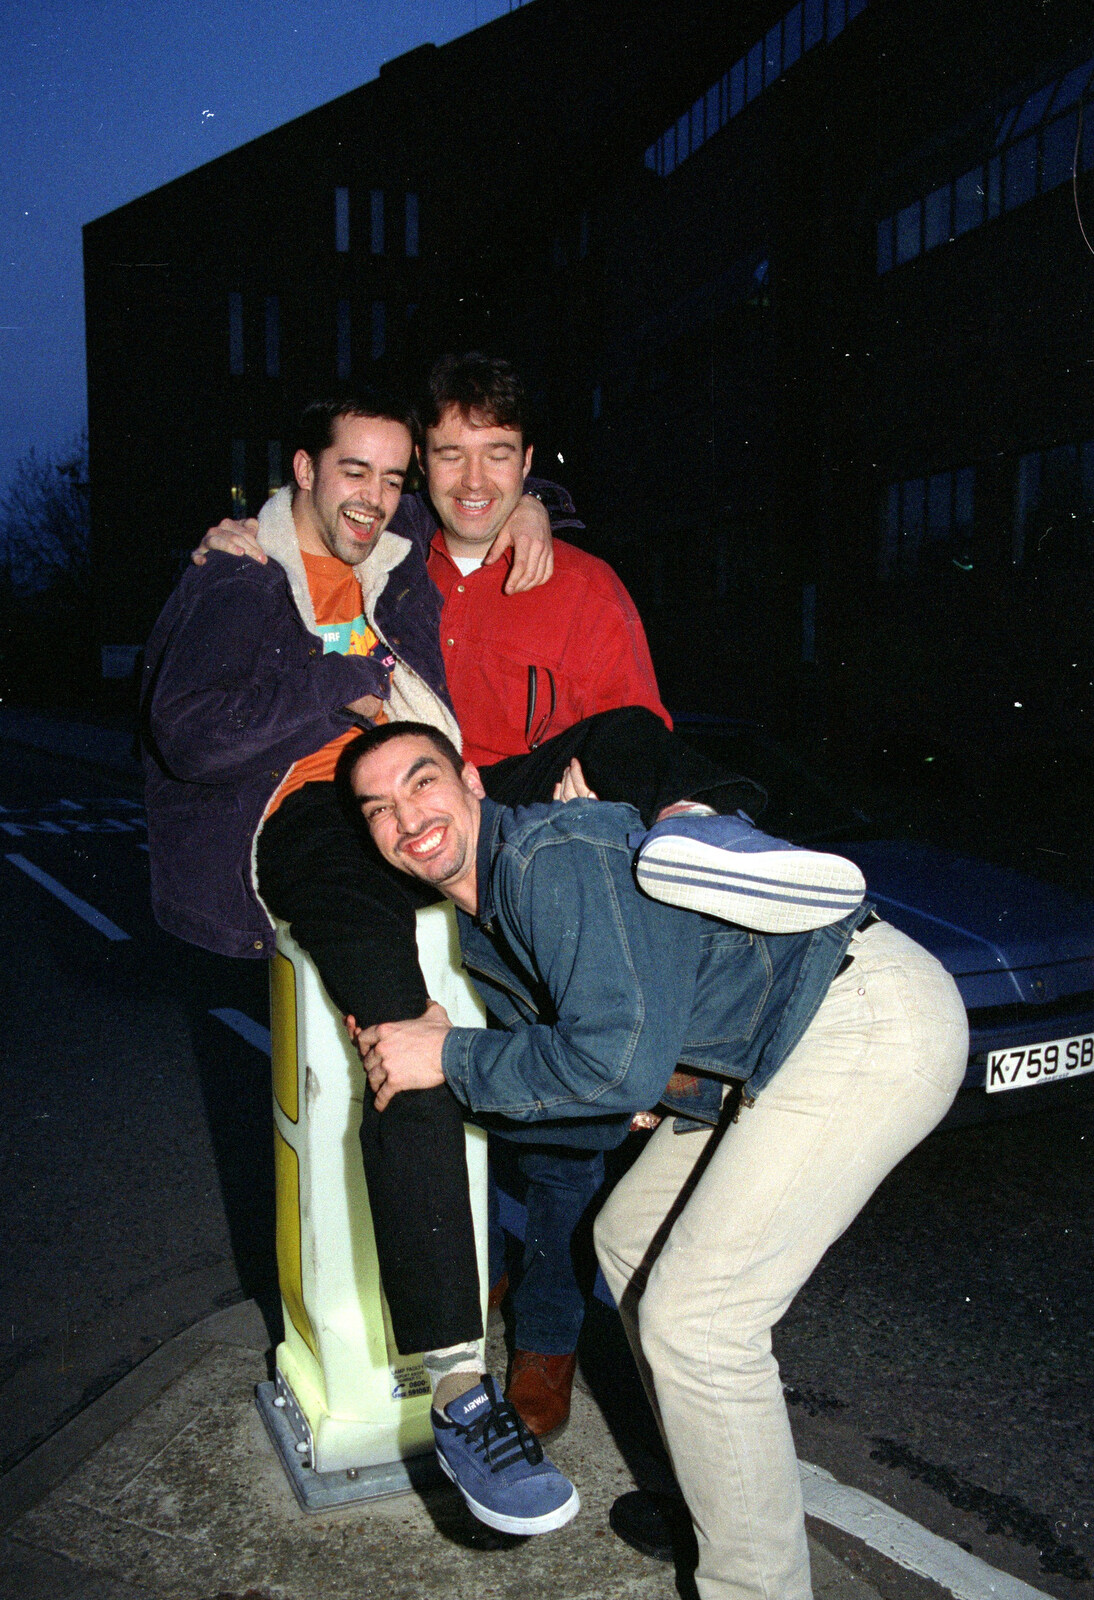 CISU, Los Mexicanos and the Inflatable Woman, Ipswich, Suffolk - 25th April 1996: Trev is dumped on a bollard outside St. Edmund House